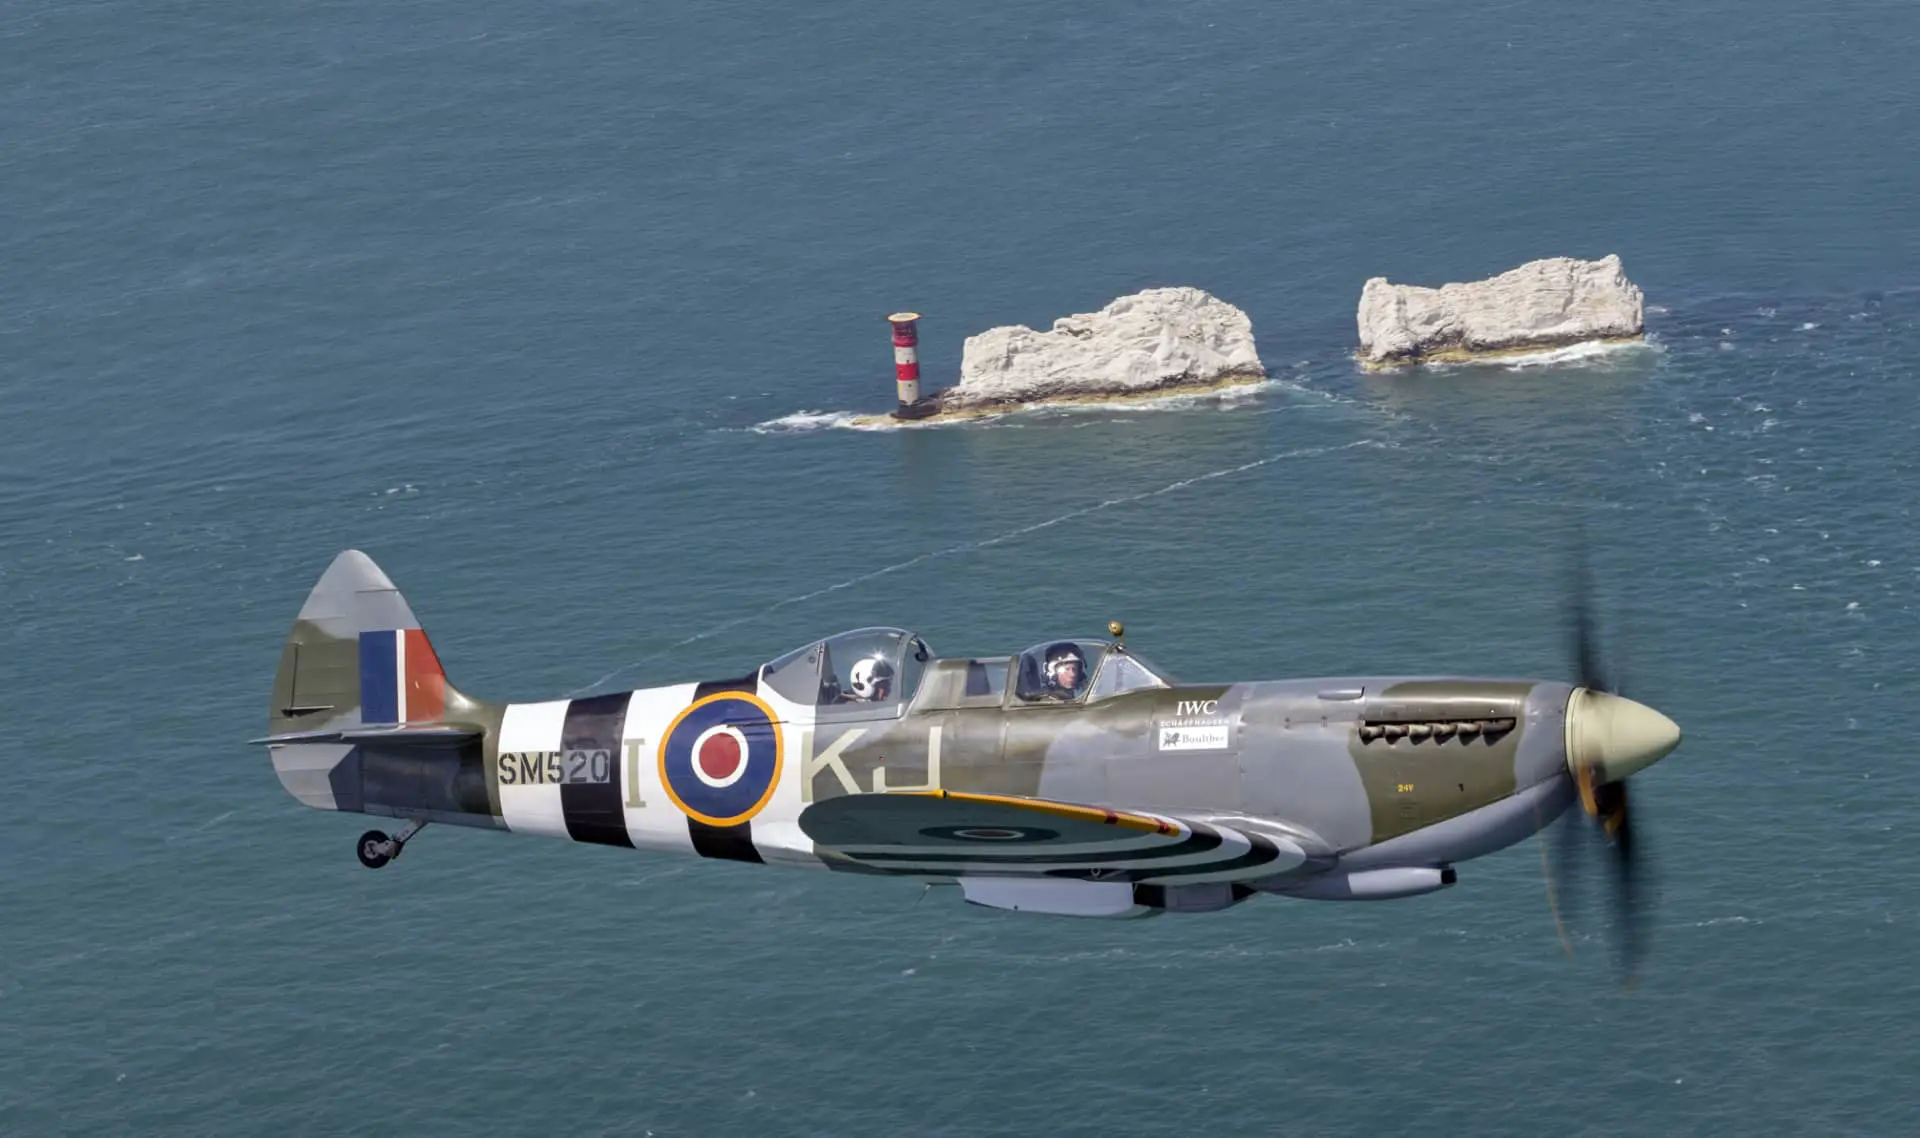 Flying in a Spitfire over the Isle of Wight. How much does it cost and how do you arrange it?